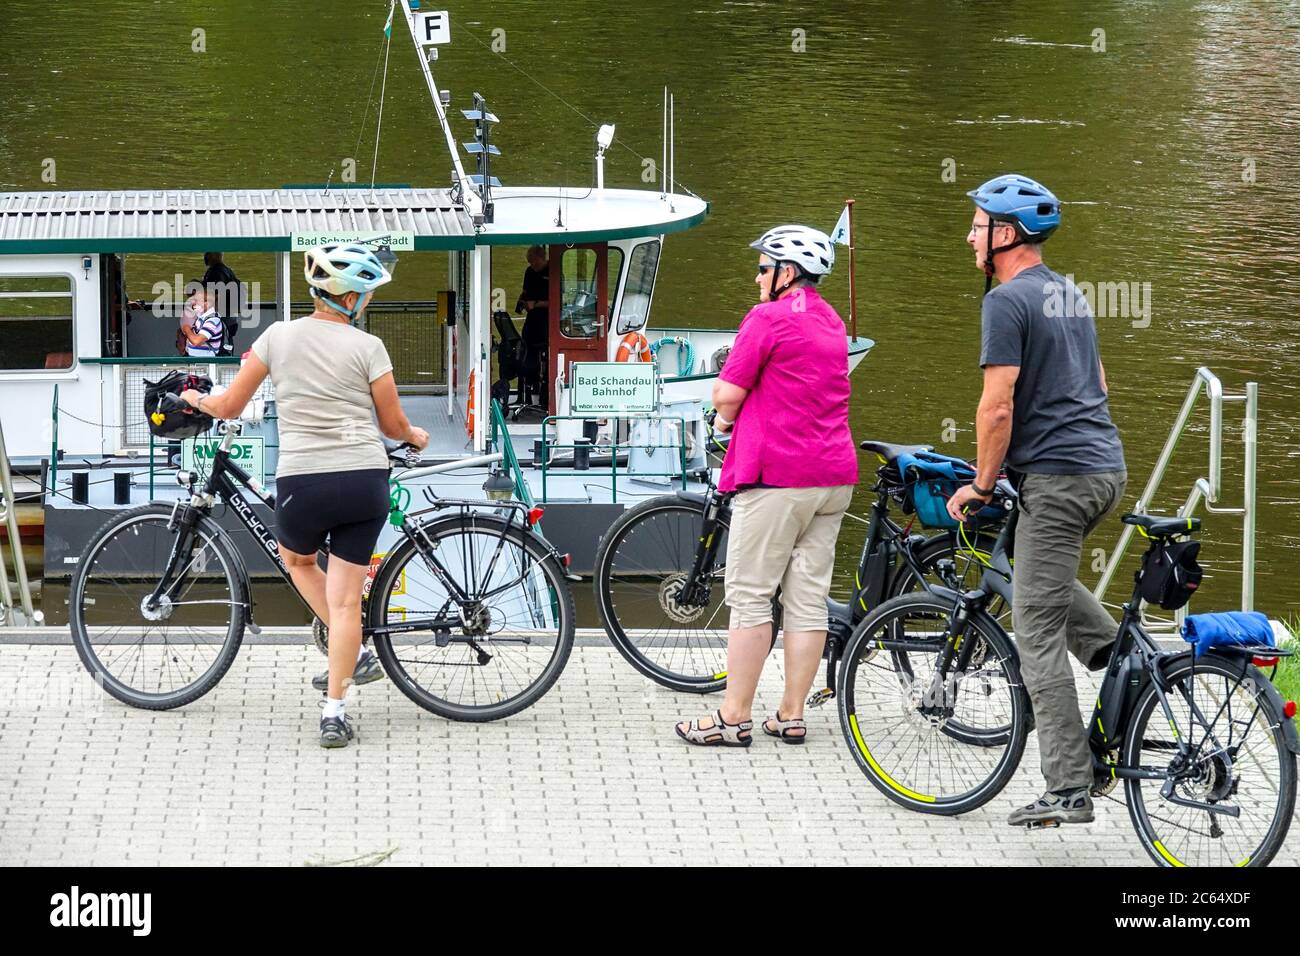 Elbe river ferry boat and seniors on bicycles Bad Schandau Germany people on the cycle path, people waiting to embark, boarding Stock Photo